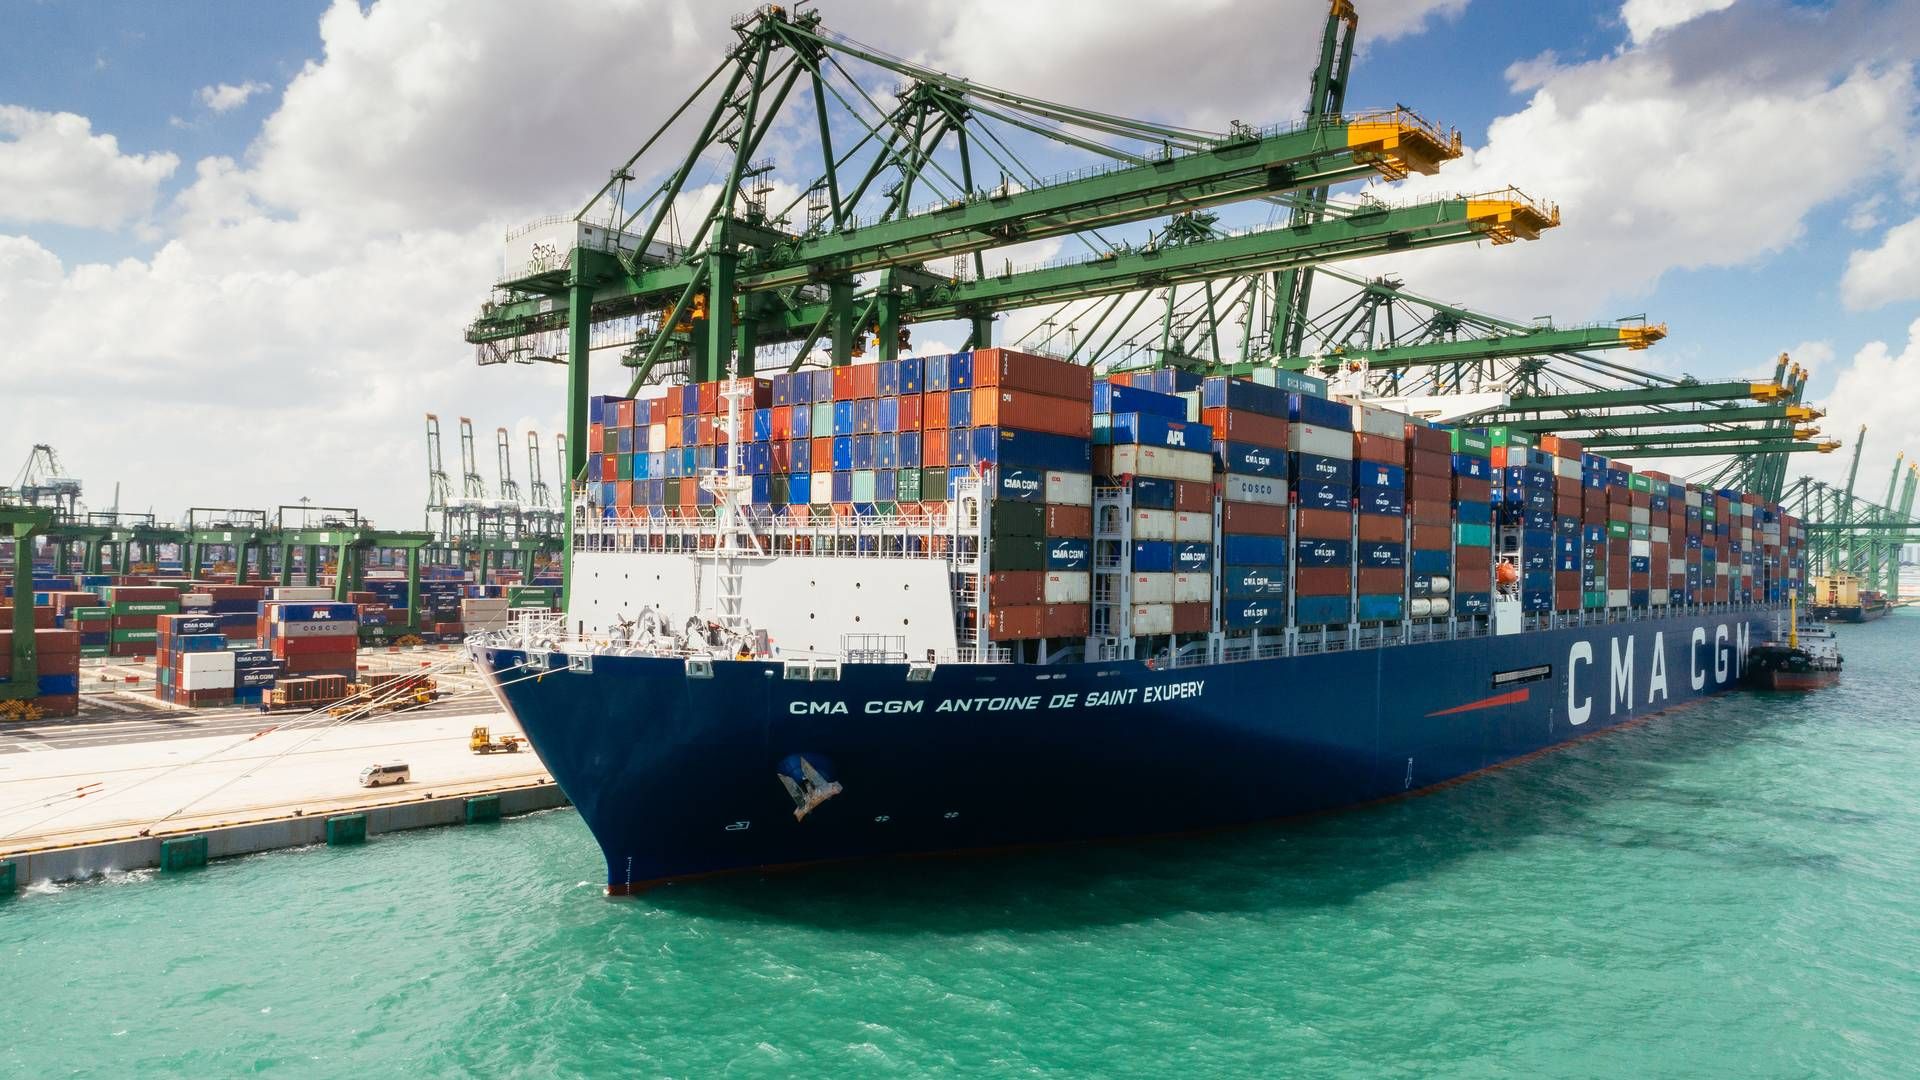 "In my view, the two shipowners’ sustainability pact could be the nucleus of a wider shipping industry representative body," says Philip Damas from consultancy house Drewry. | Photo: Pr / Cma Cgm